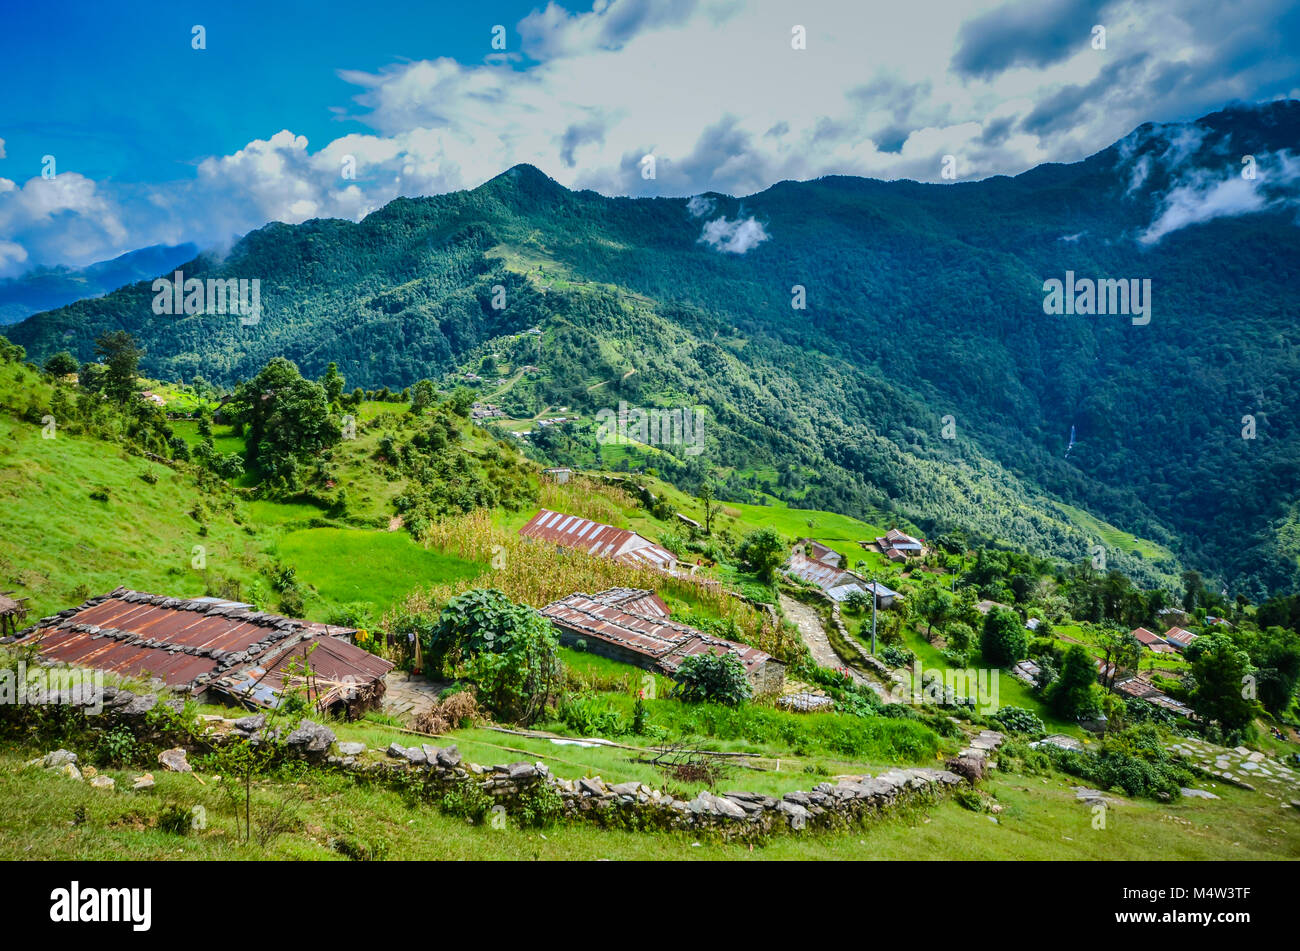 Rural village and farm on Annapurna trailside slope in the Himalayan mountains. Stock Photo